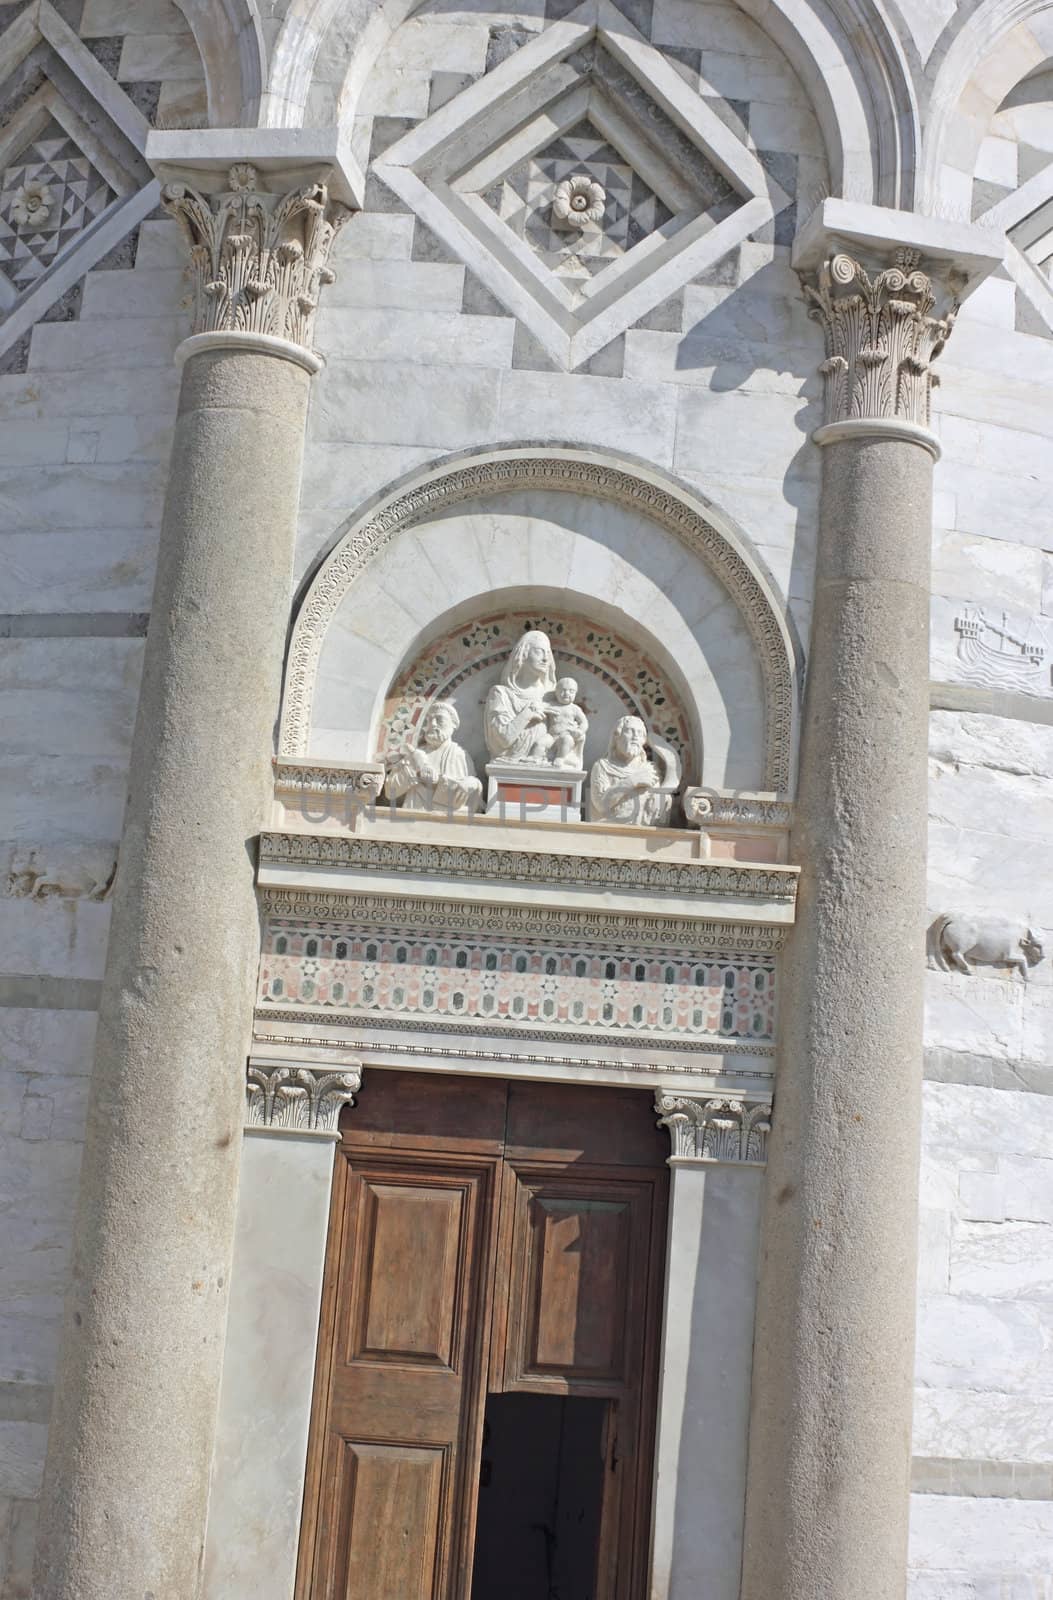 Straight shot of the leaning tower entrance door in Pisa, Italy